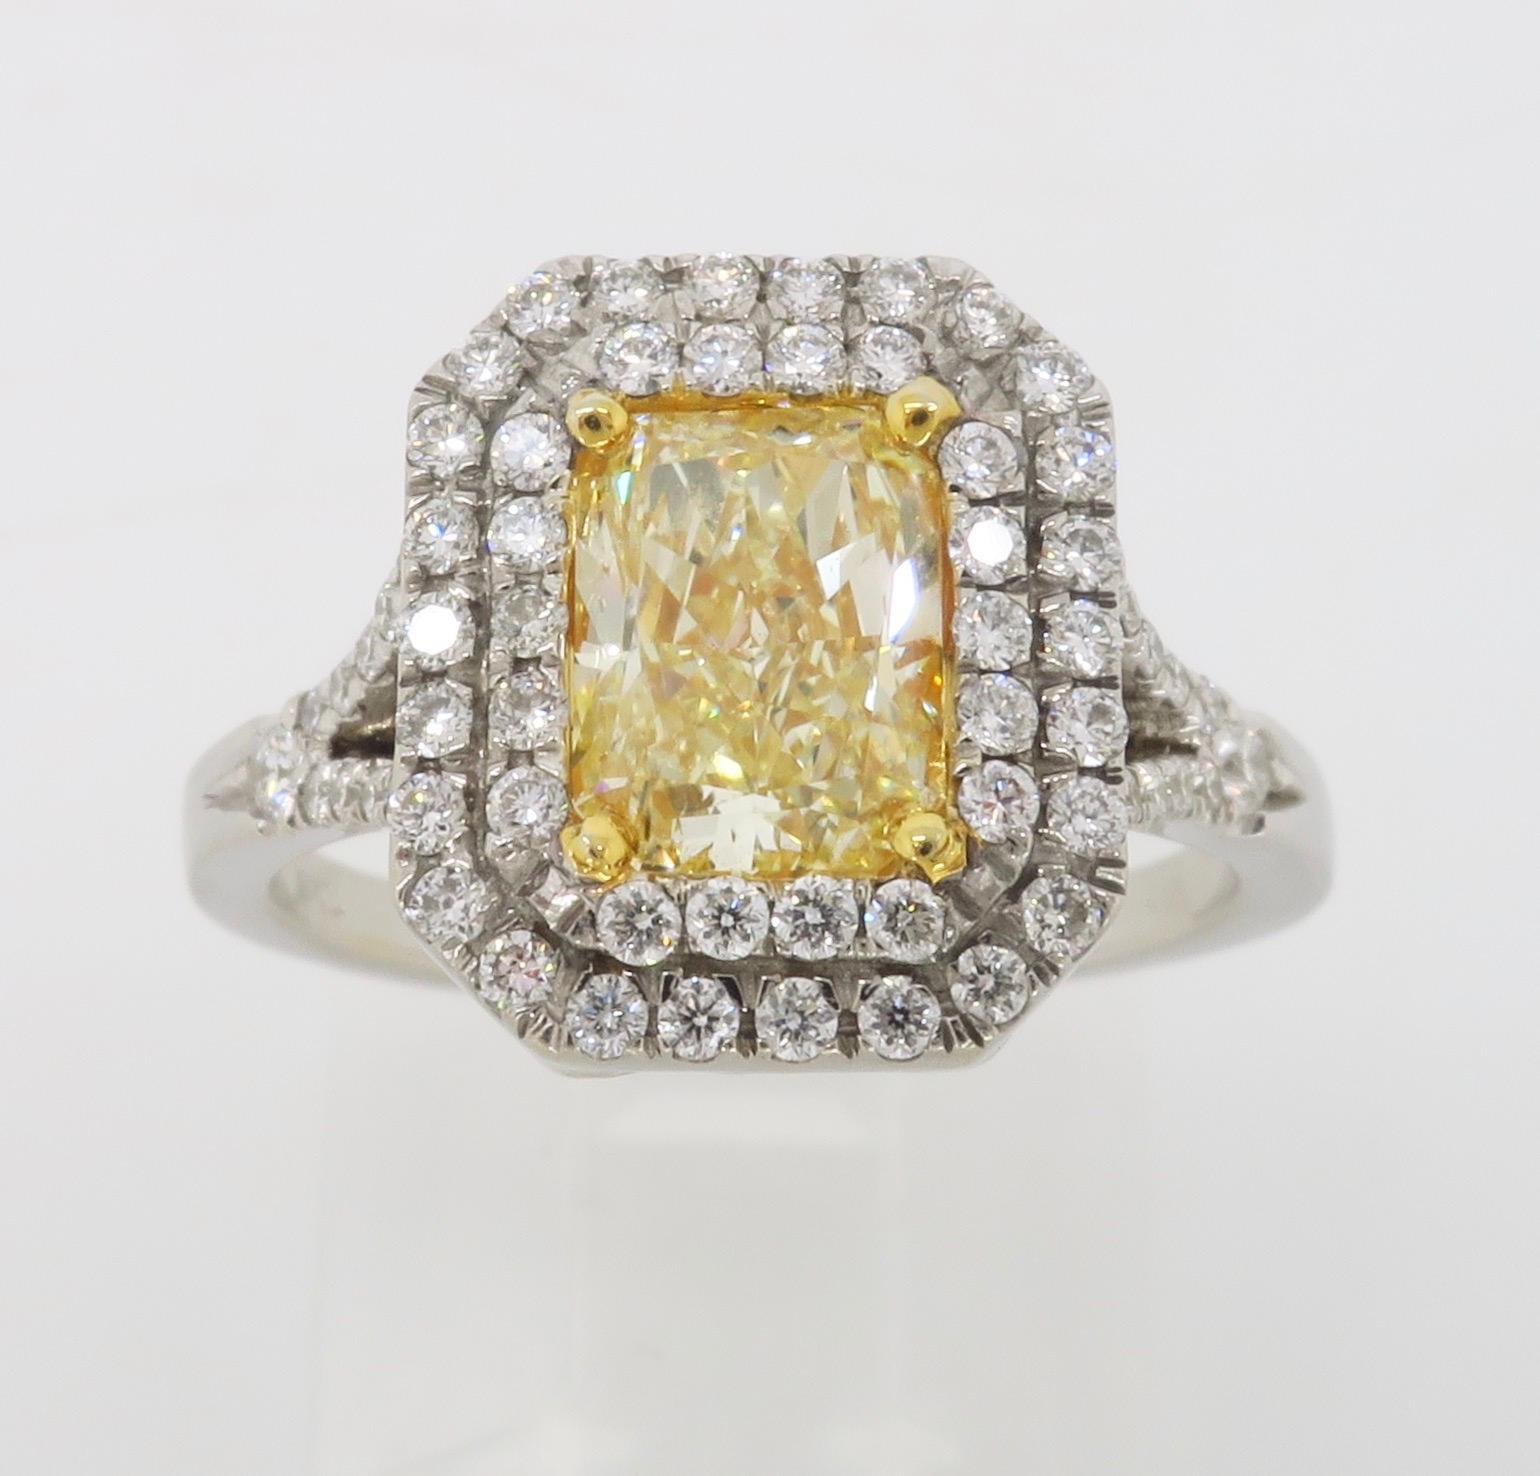 Gorgeous Radiant cut Yellow Diamond halo engagement ring made in 14k white gold. 

Center Diamond Carat Weight:  1.25CT
Center Diamond Cut: Radiant cut 
Center Diamond Color: Fancy Light Yellow
Center Diamond Clarity: VS2
Total Diamond Carat Weight: